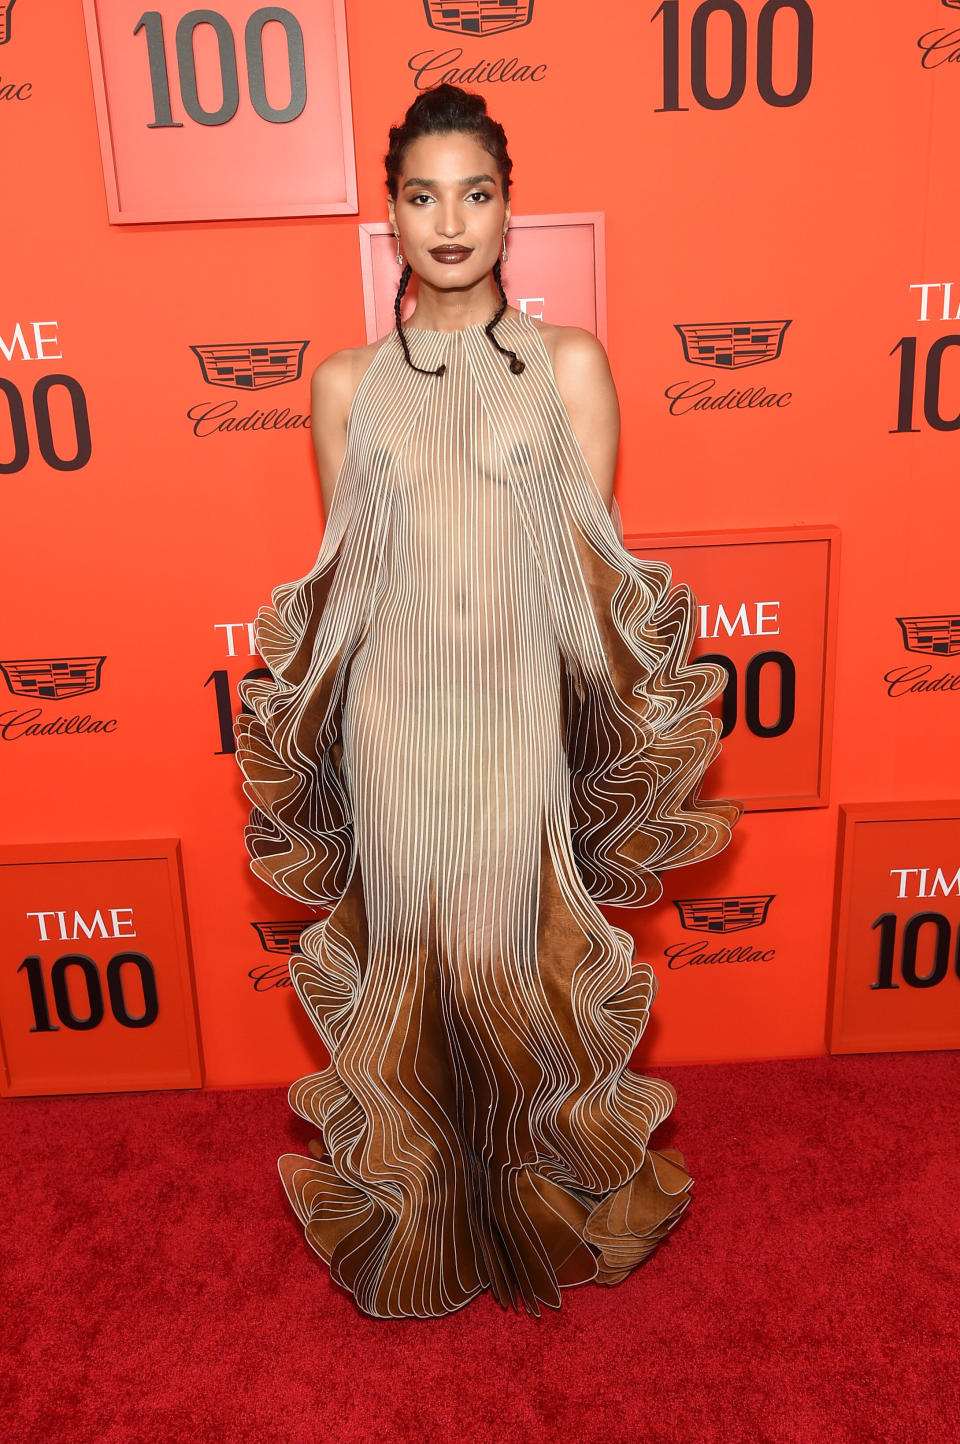 Indya Moore at the Time 100 Gala in New York on April 23.